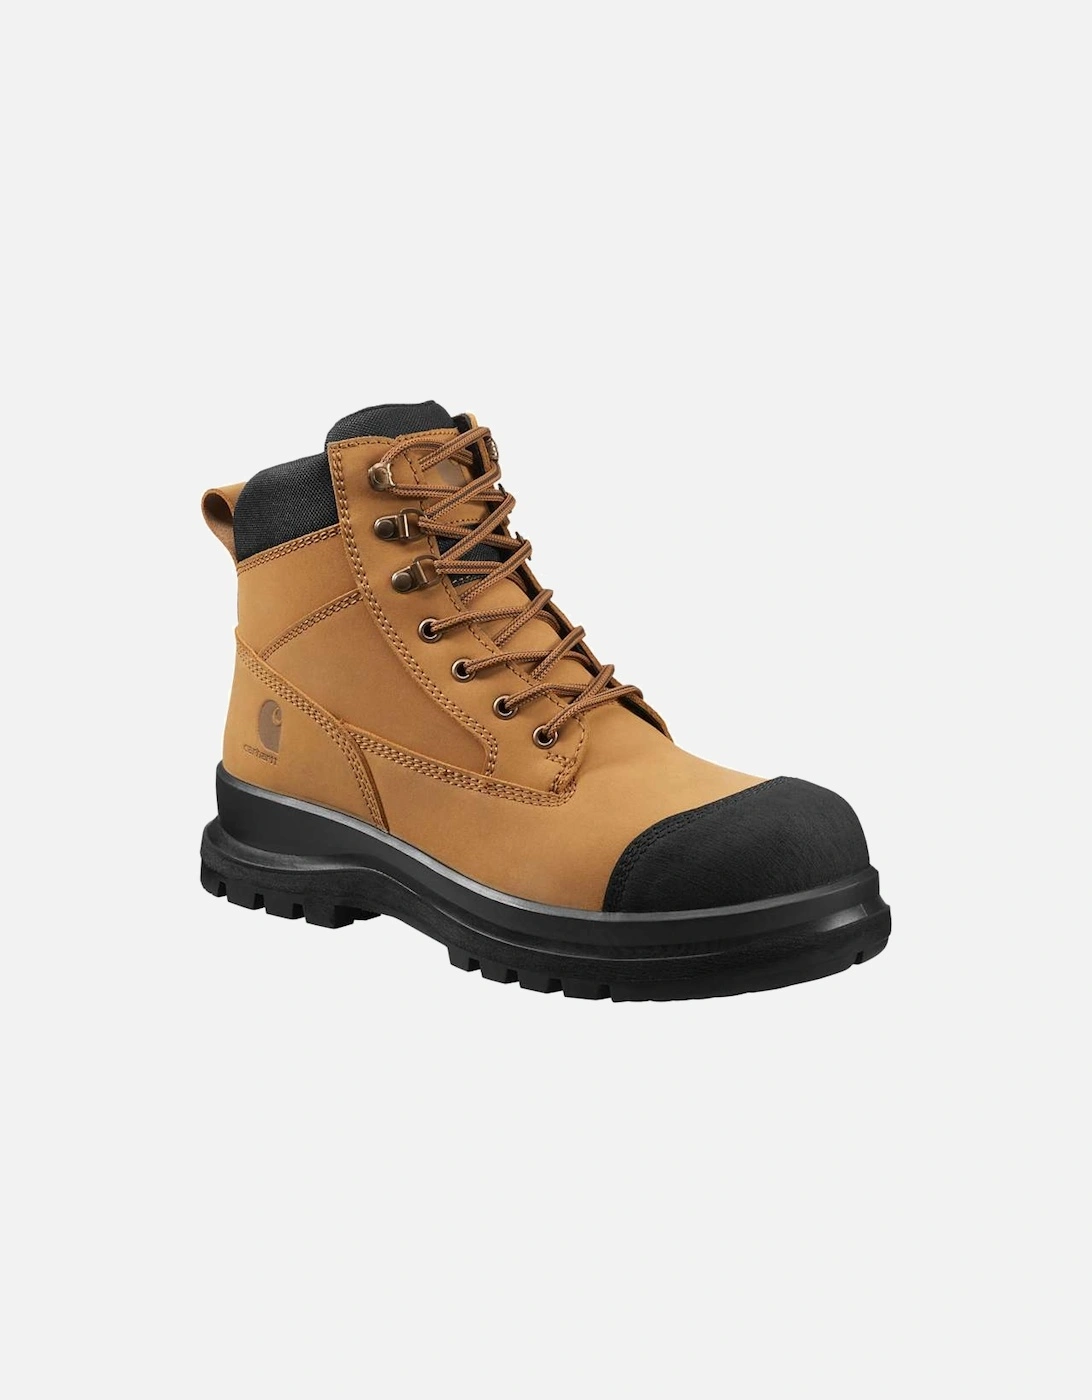 Carhartt Mens Detroit 6" S3 Lace Up Zip Up Safety Boots, 6 of 5